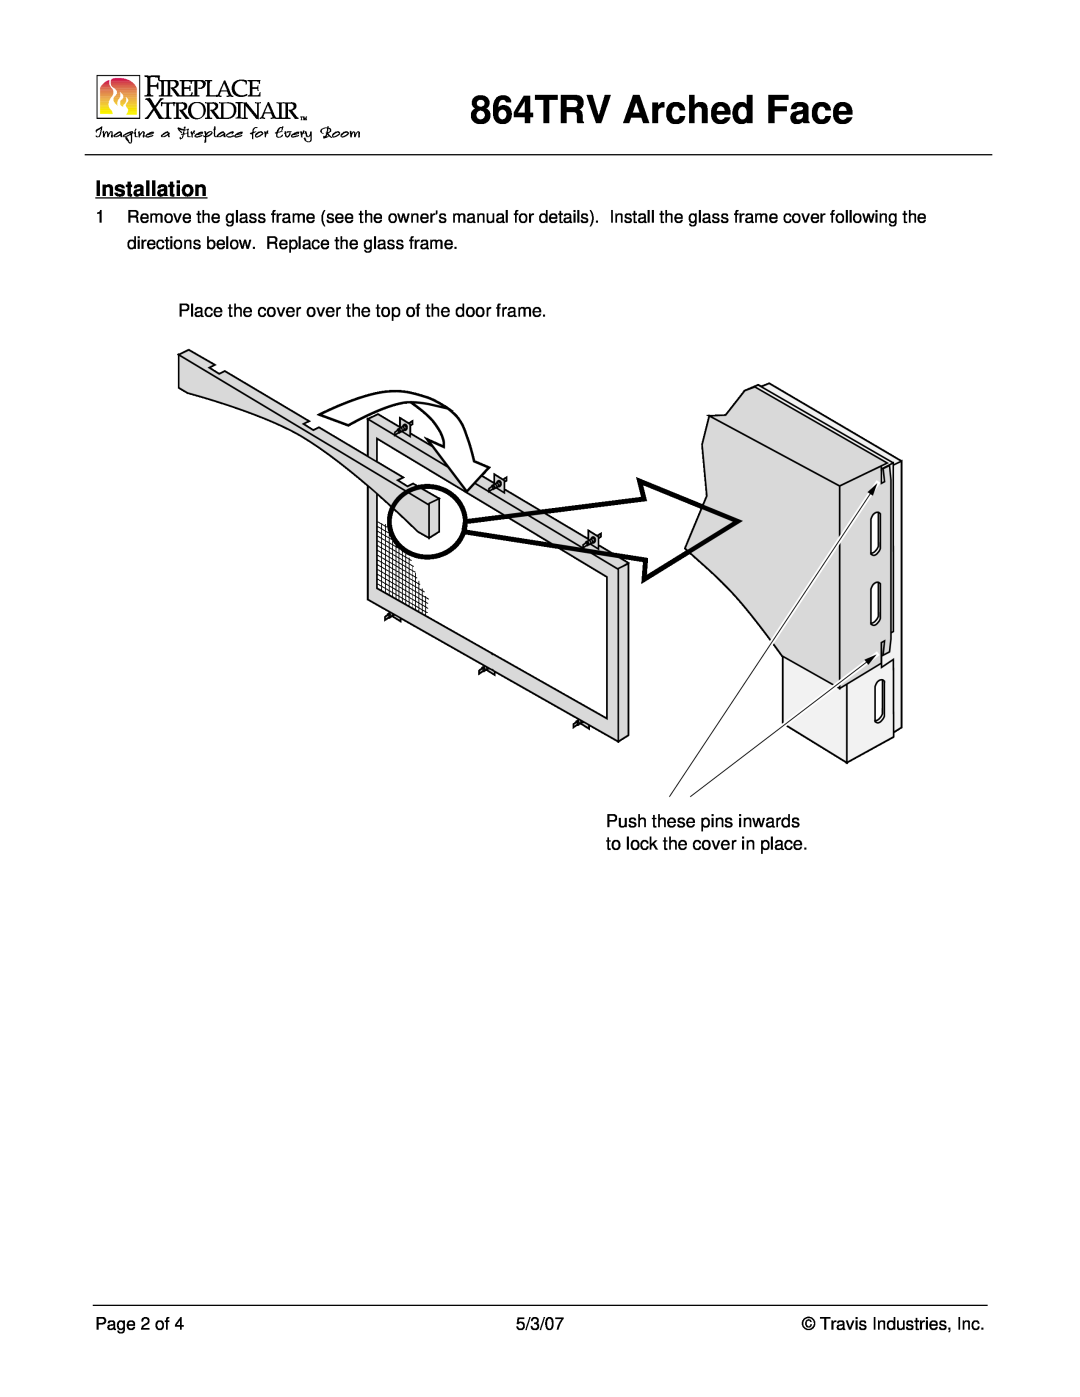 FireplaceXtrordinair manual Installation, Page 2 of, 864TRV Arched Face, Place the cover over the top of the door frame 